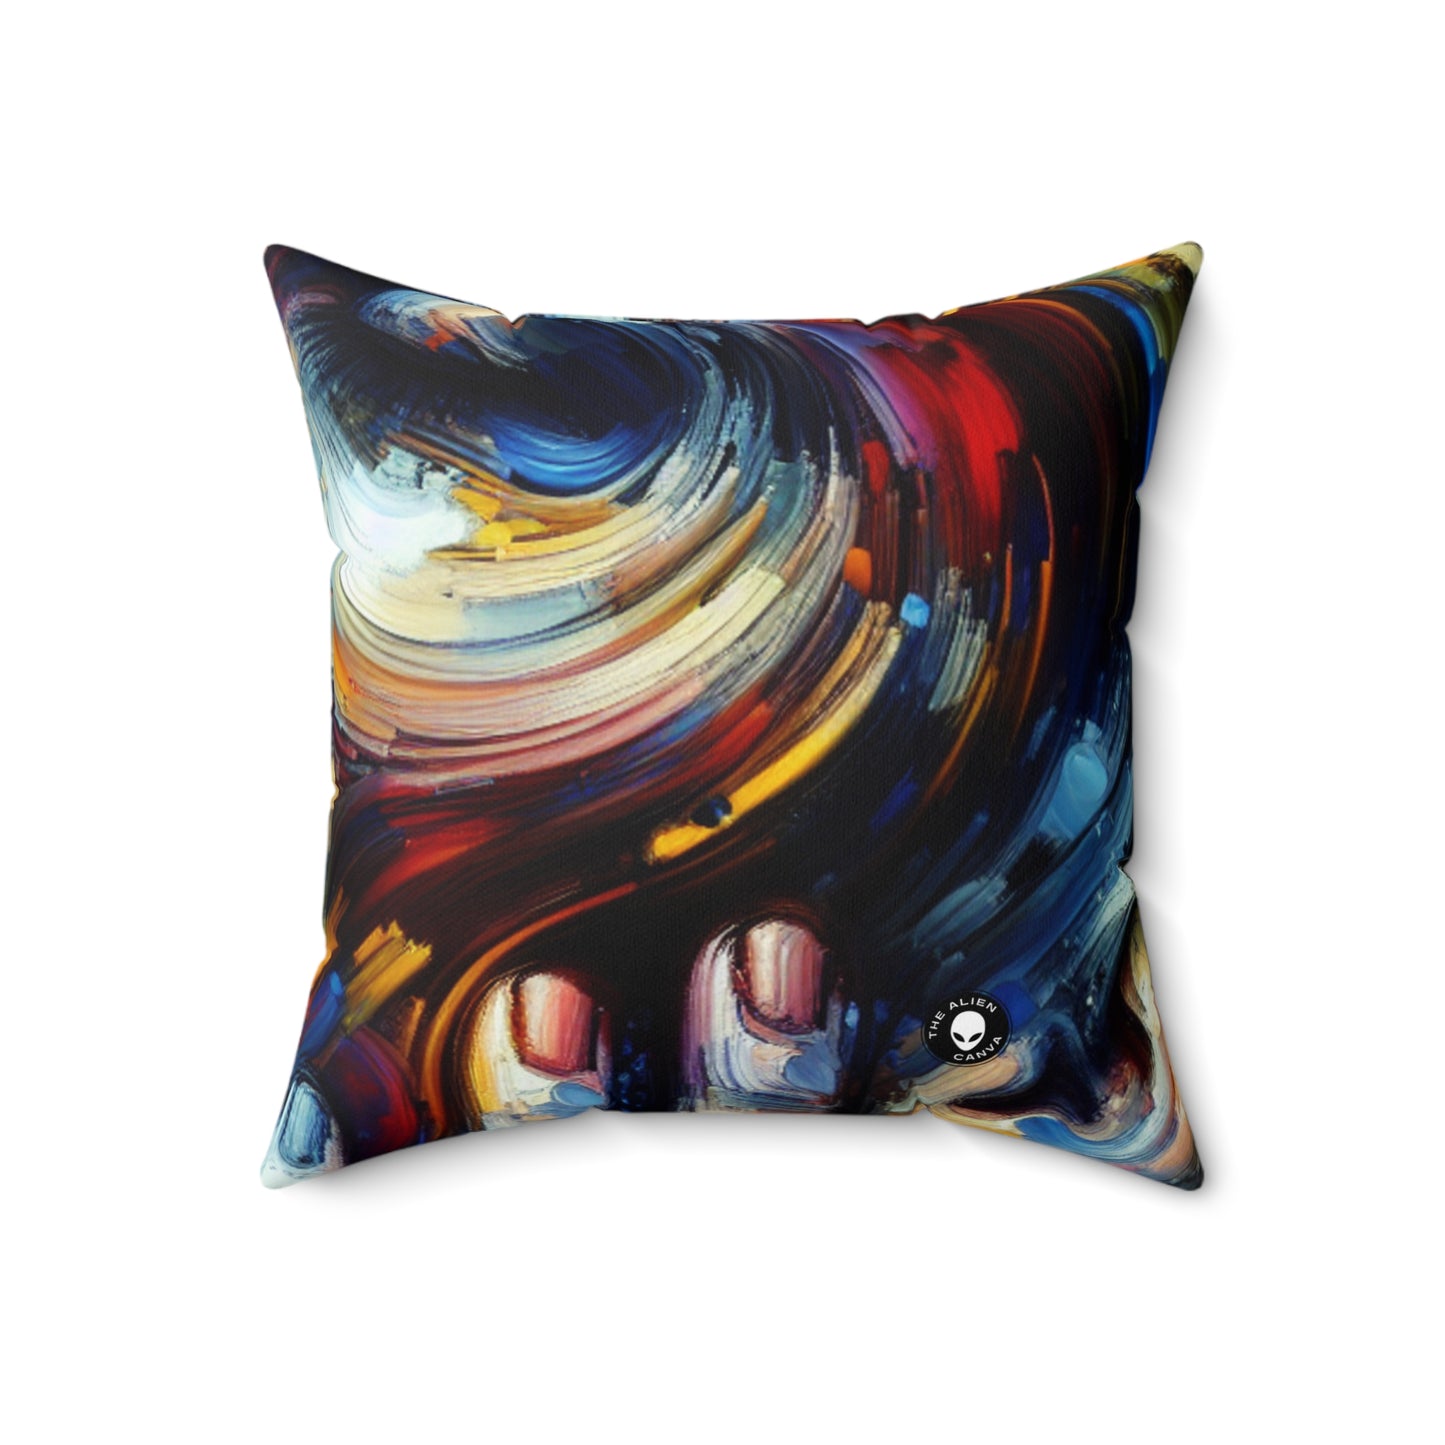 "City Lights: A Neo-Expressionist Ode to Urban Chaos"- The Alien Spun Polyester Square Pillow Neo-Expressionism